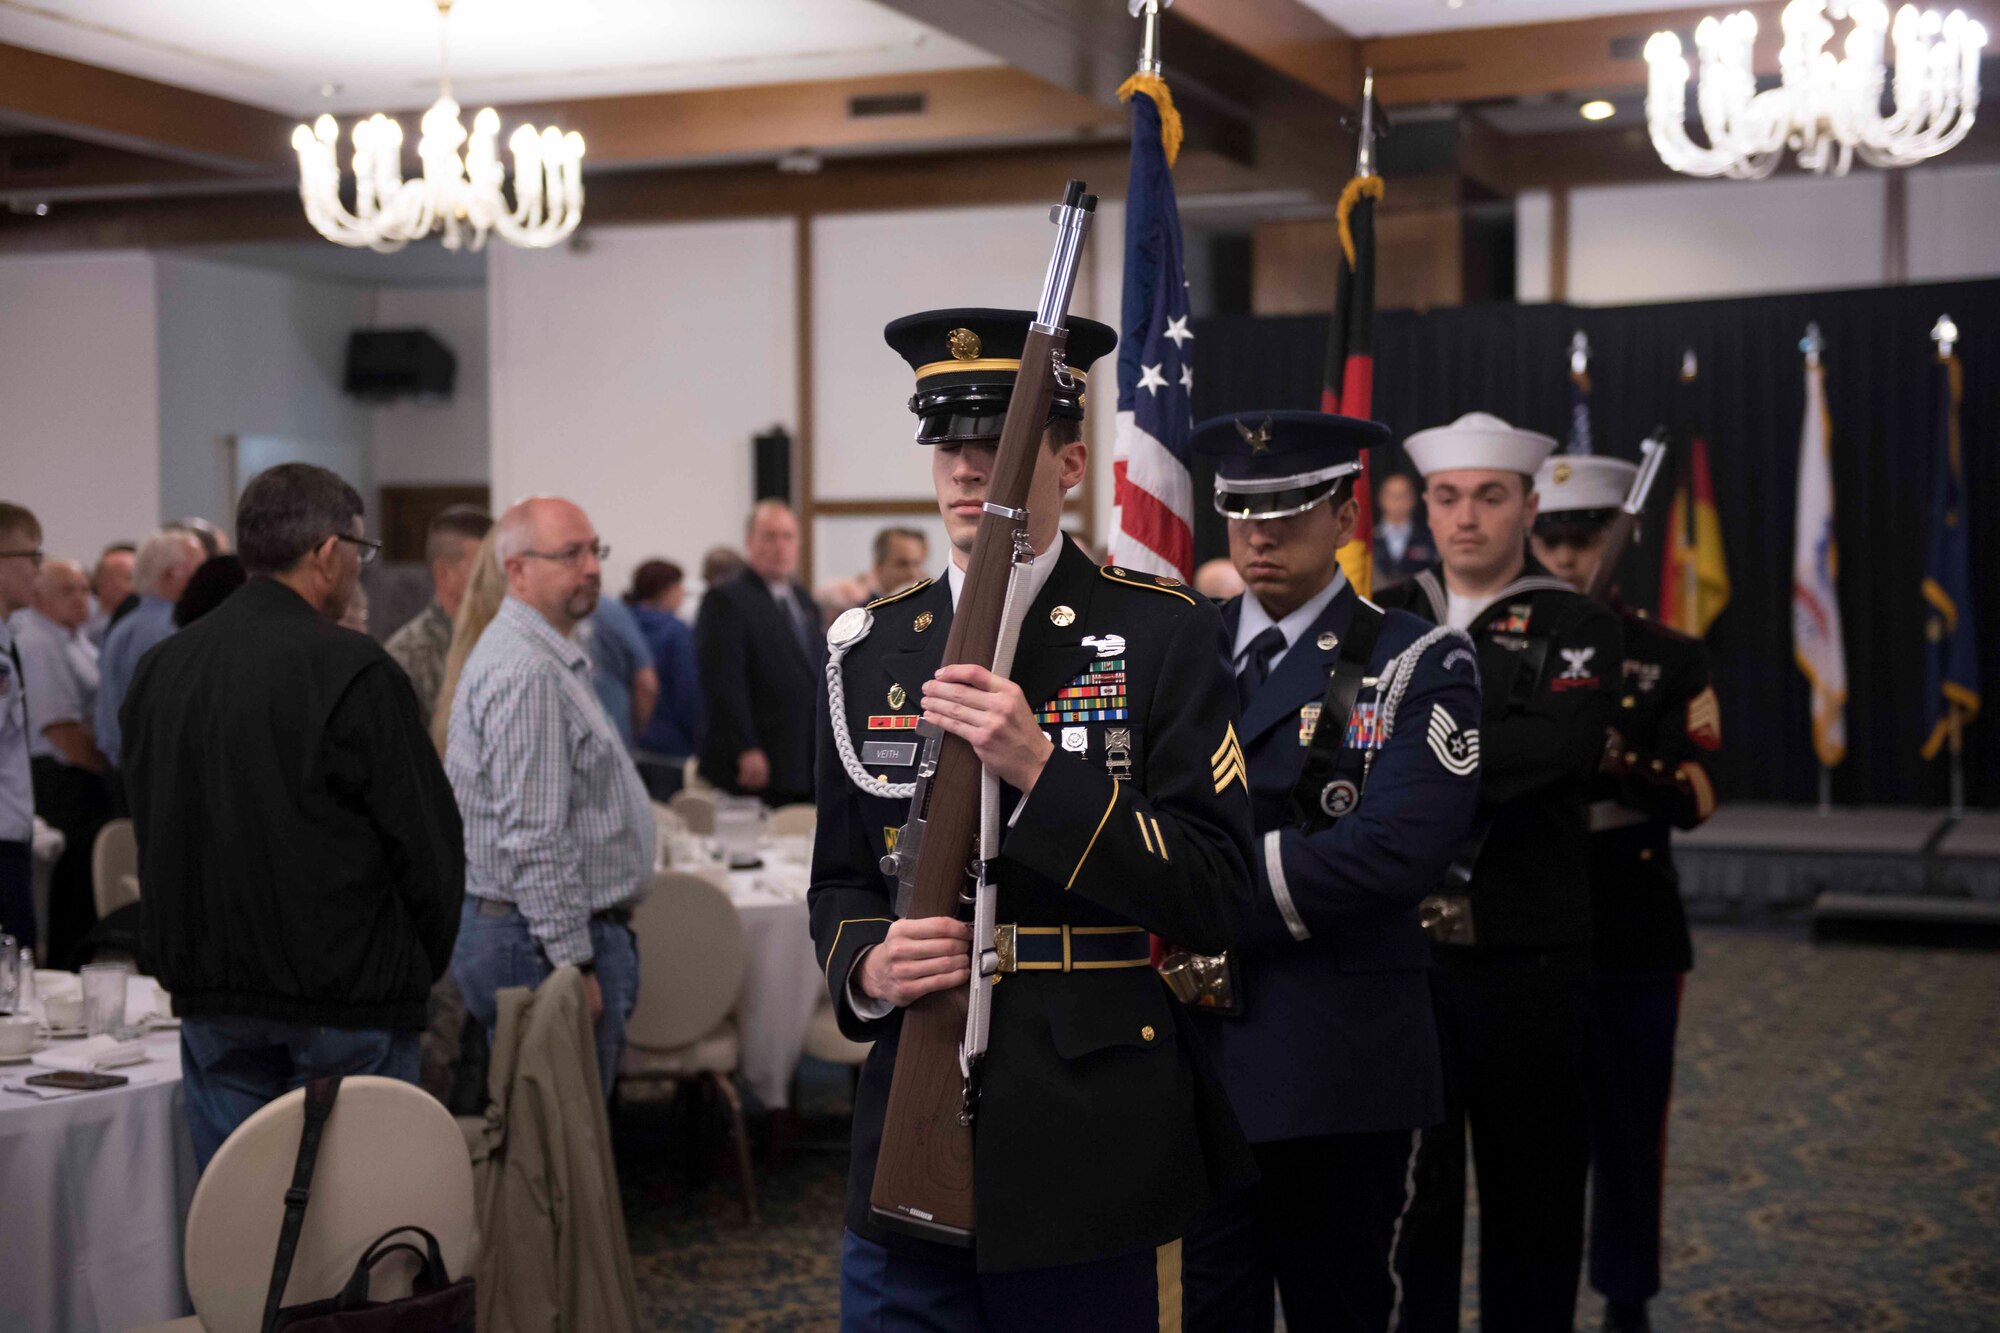 The Joint Color Guard conclude their ceremony for Retiree Appreciation Day at the Ramstein Officer’s Club on Oct. 18, 2017. The Joint Color Guard ceremony, and both national anthems performed by a United States Air Forces in Europe band performer, were well received by members of the audience.